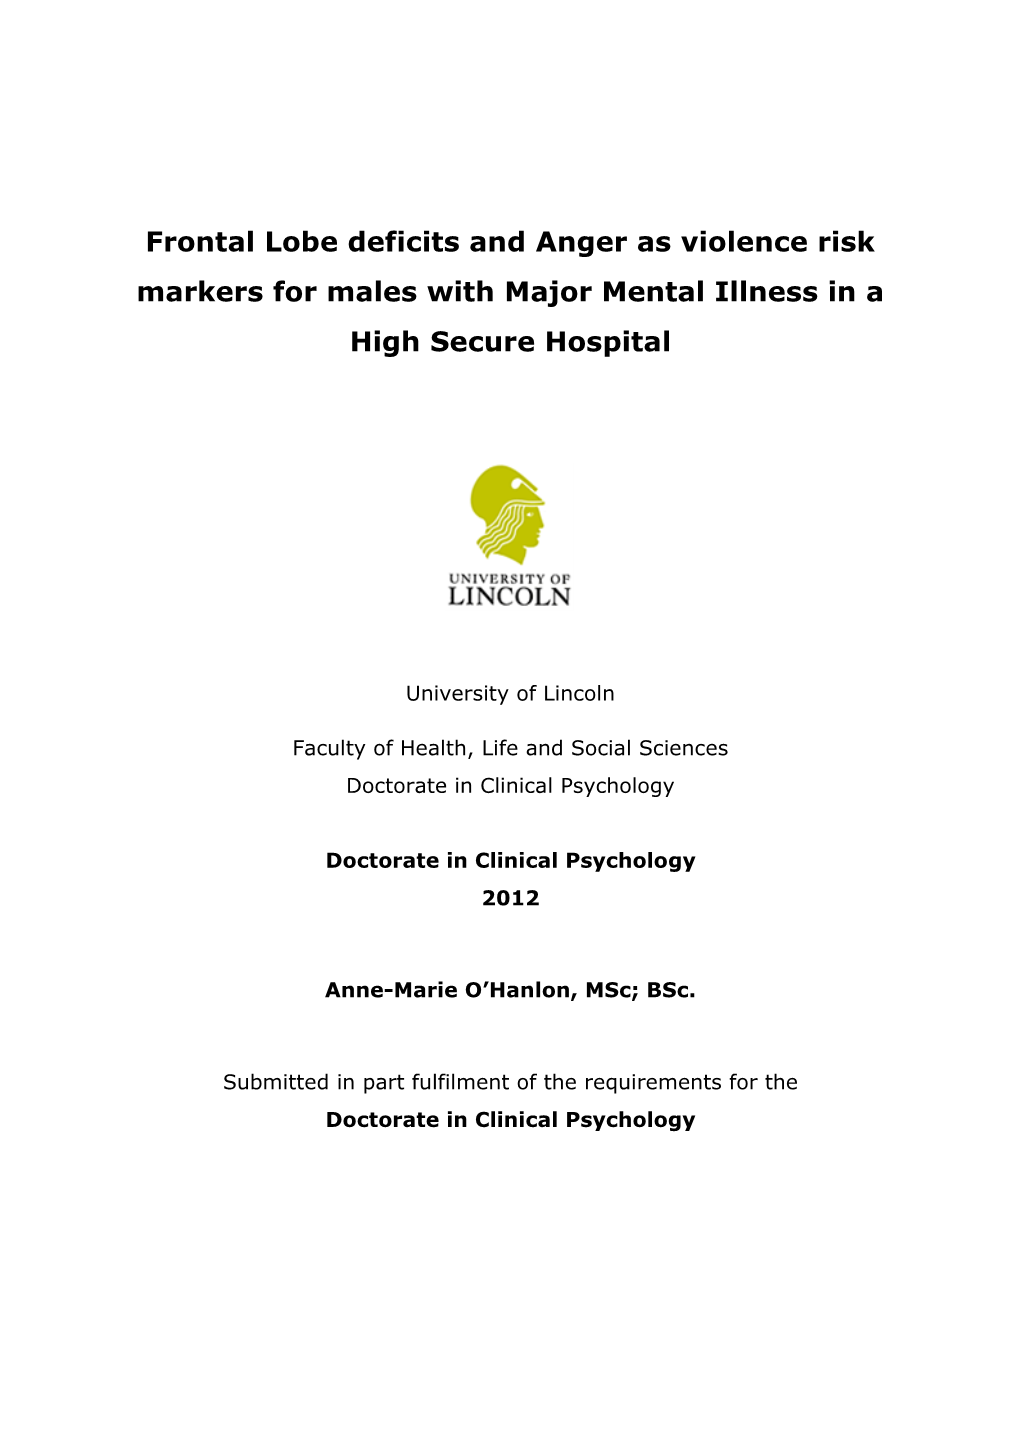 Frontal Lobe Deficits and Anger As Violence Risk Markers for Males with Major Mental Illness in a High Secure Hospital